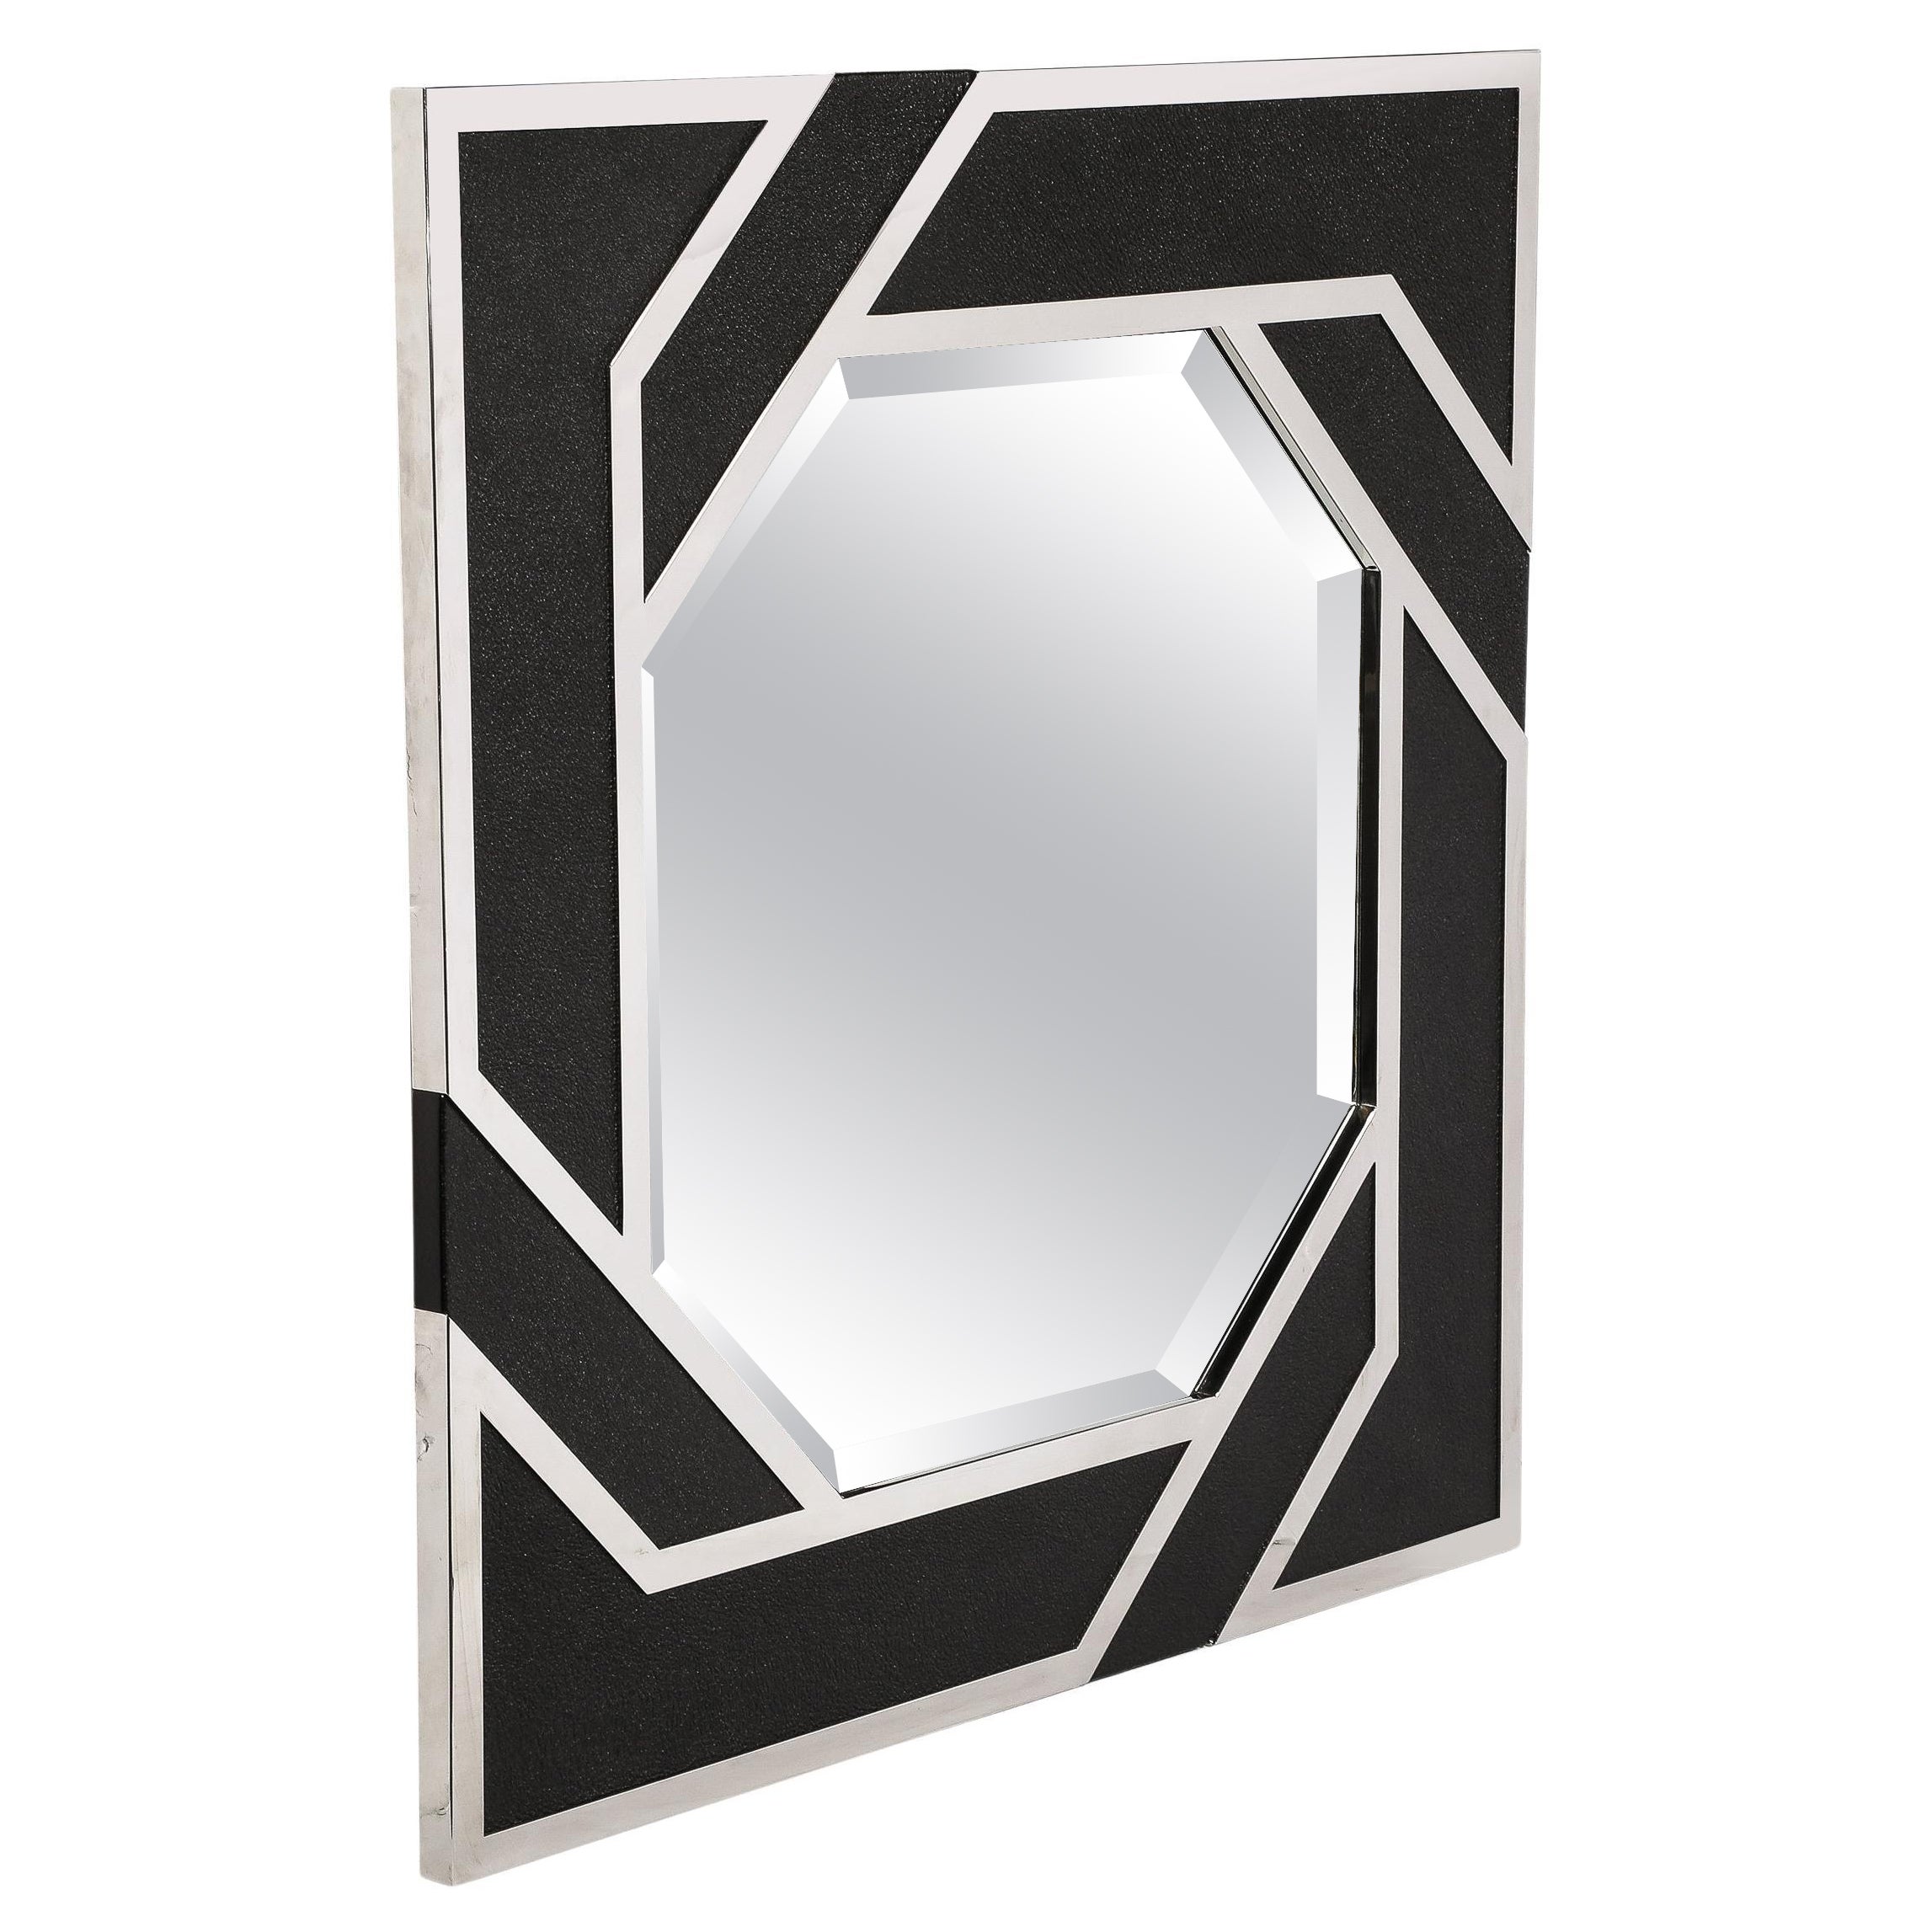 Modernist Embossed Leather & Chrome Spiral Form Geometric Mirror by Lorin Marsh